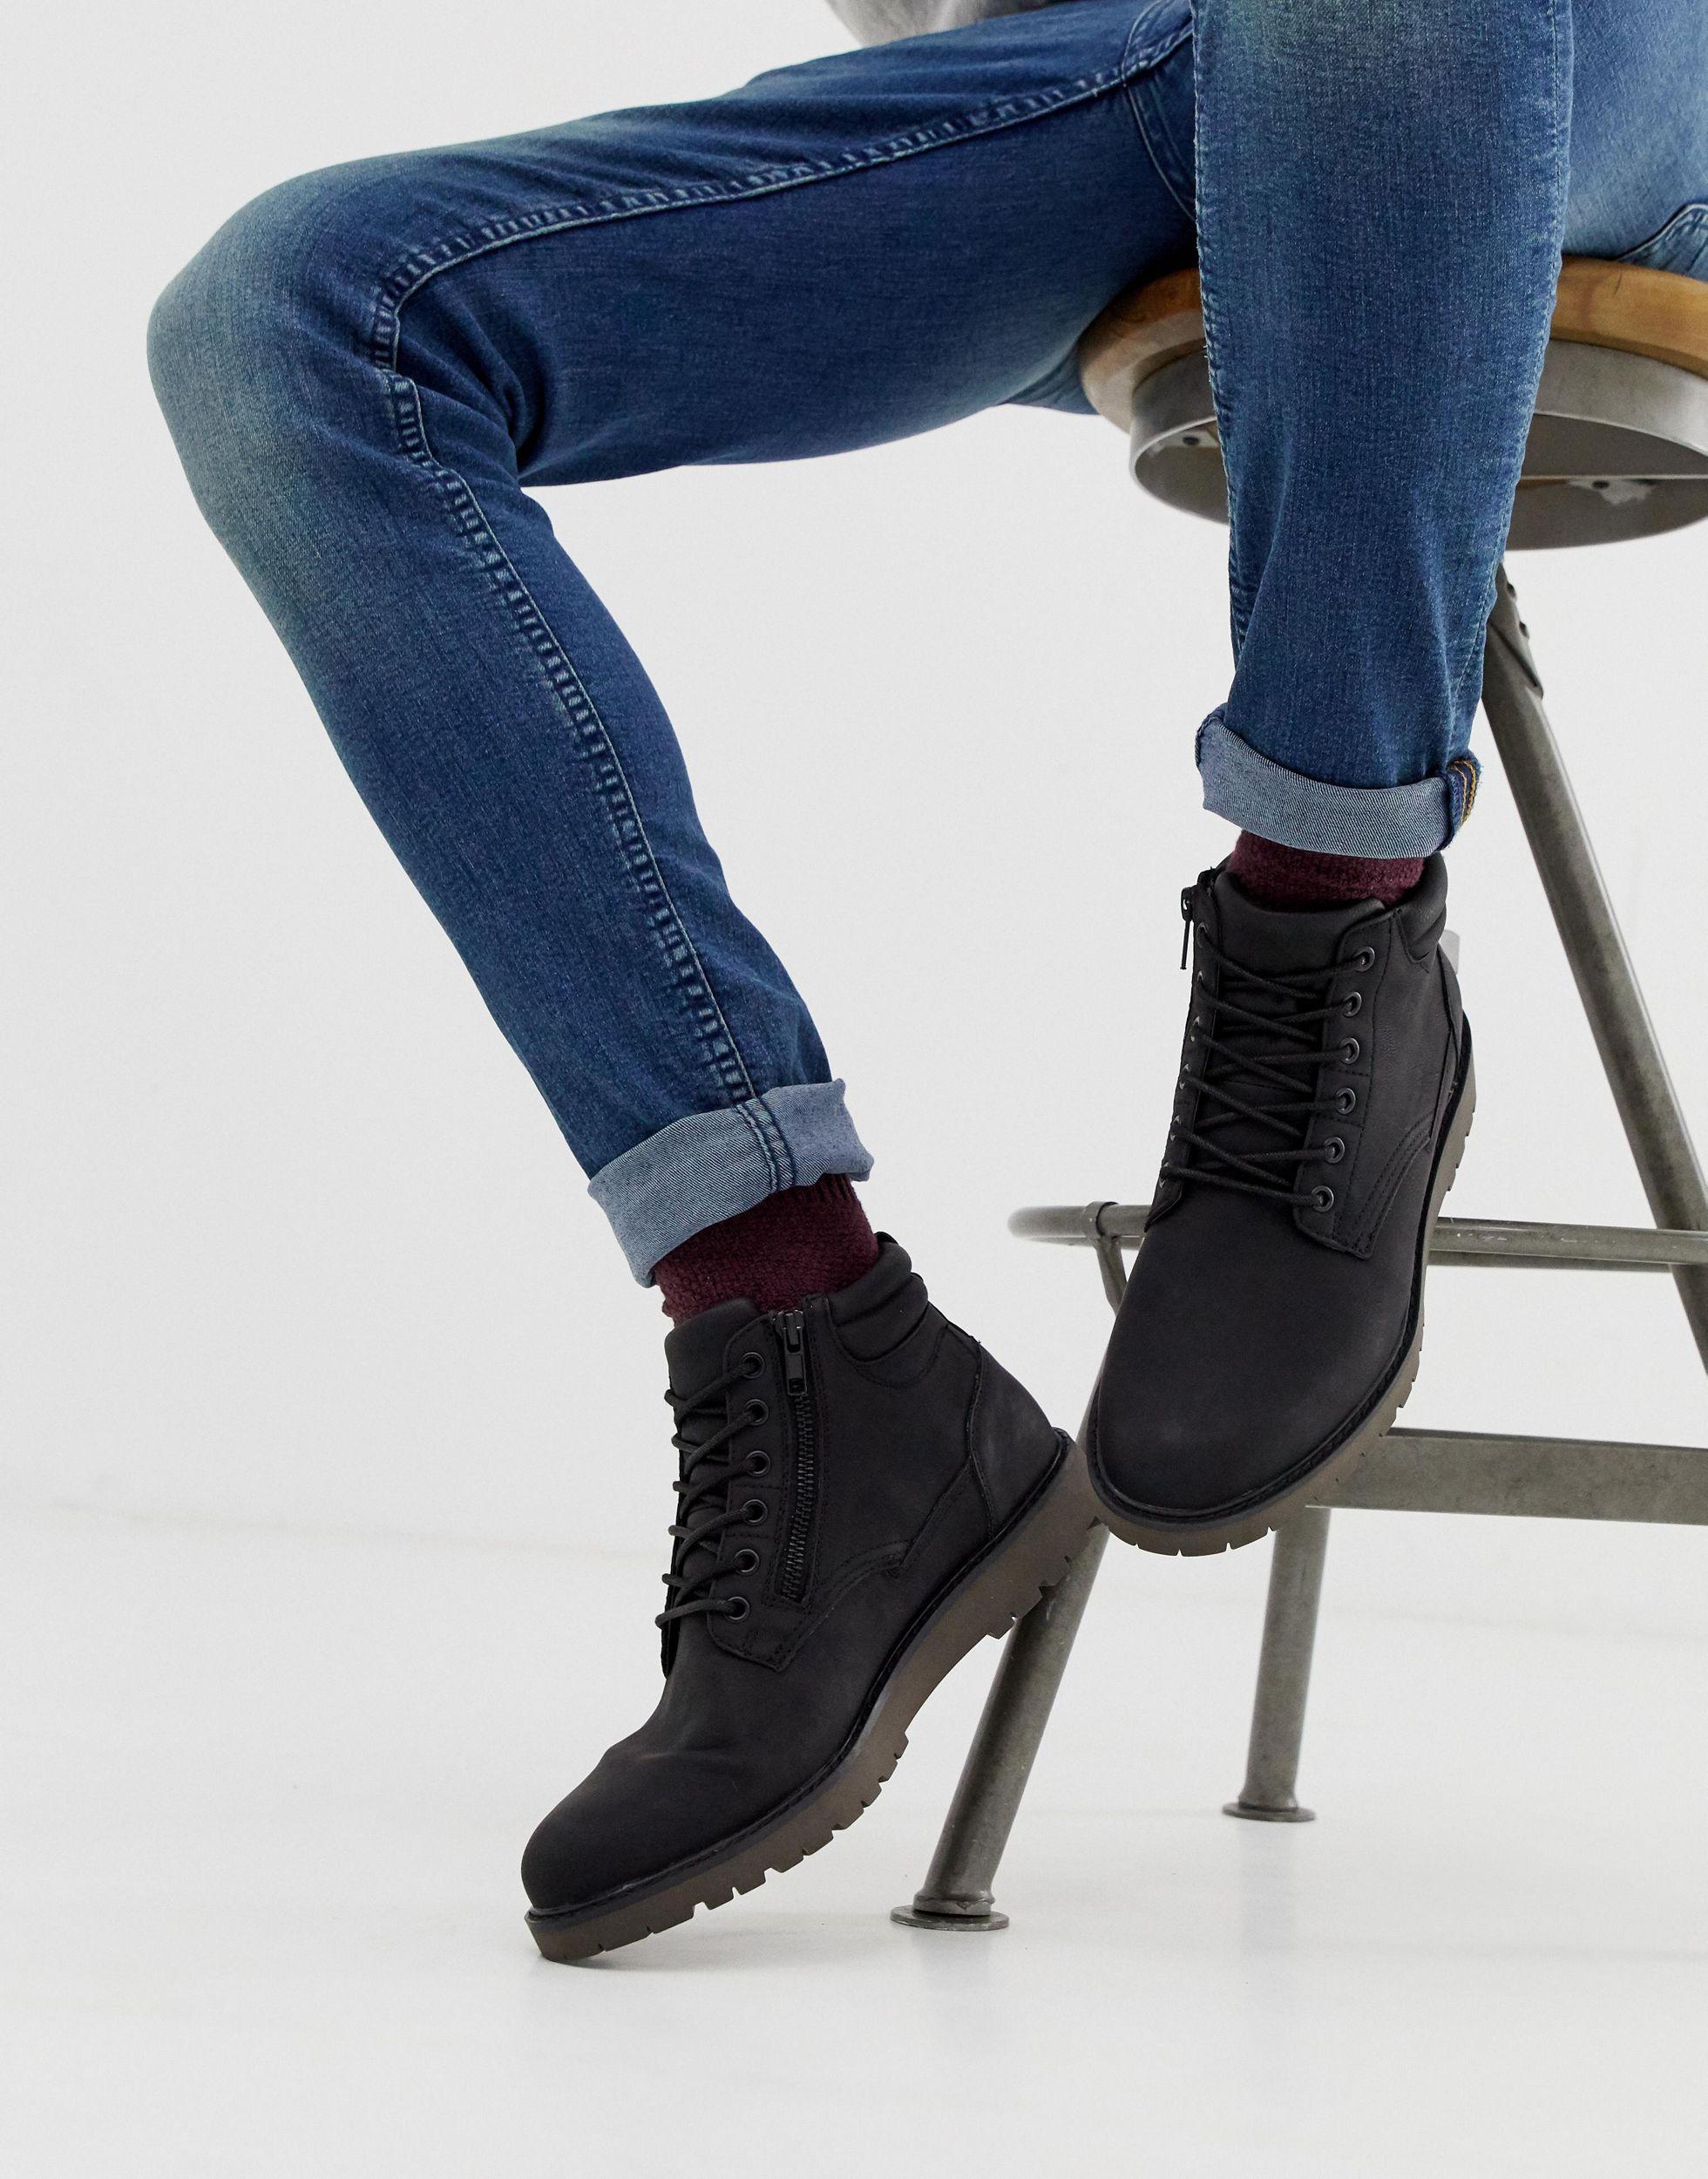 Pull&Bear Denim Lace Up Boots in Black for Men - Lyst